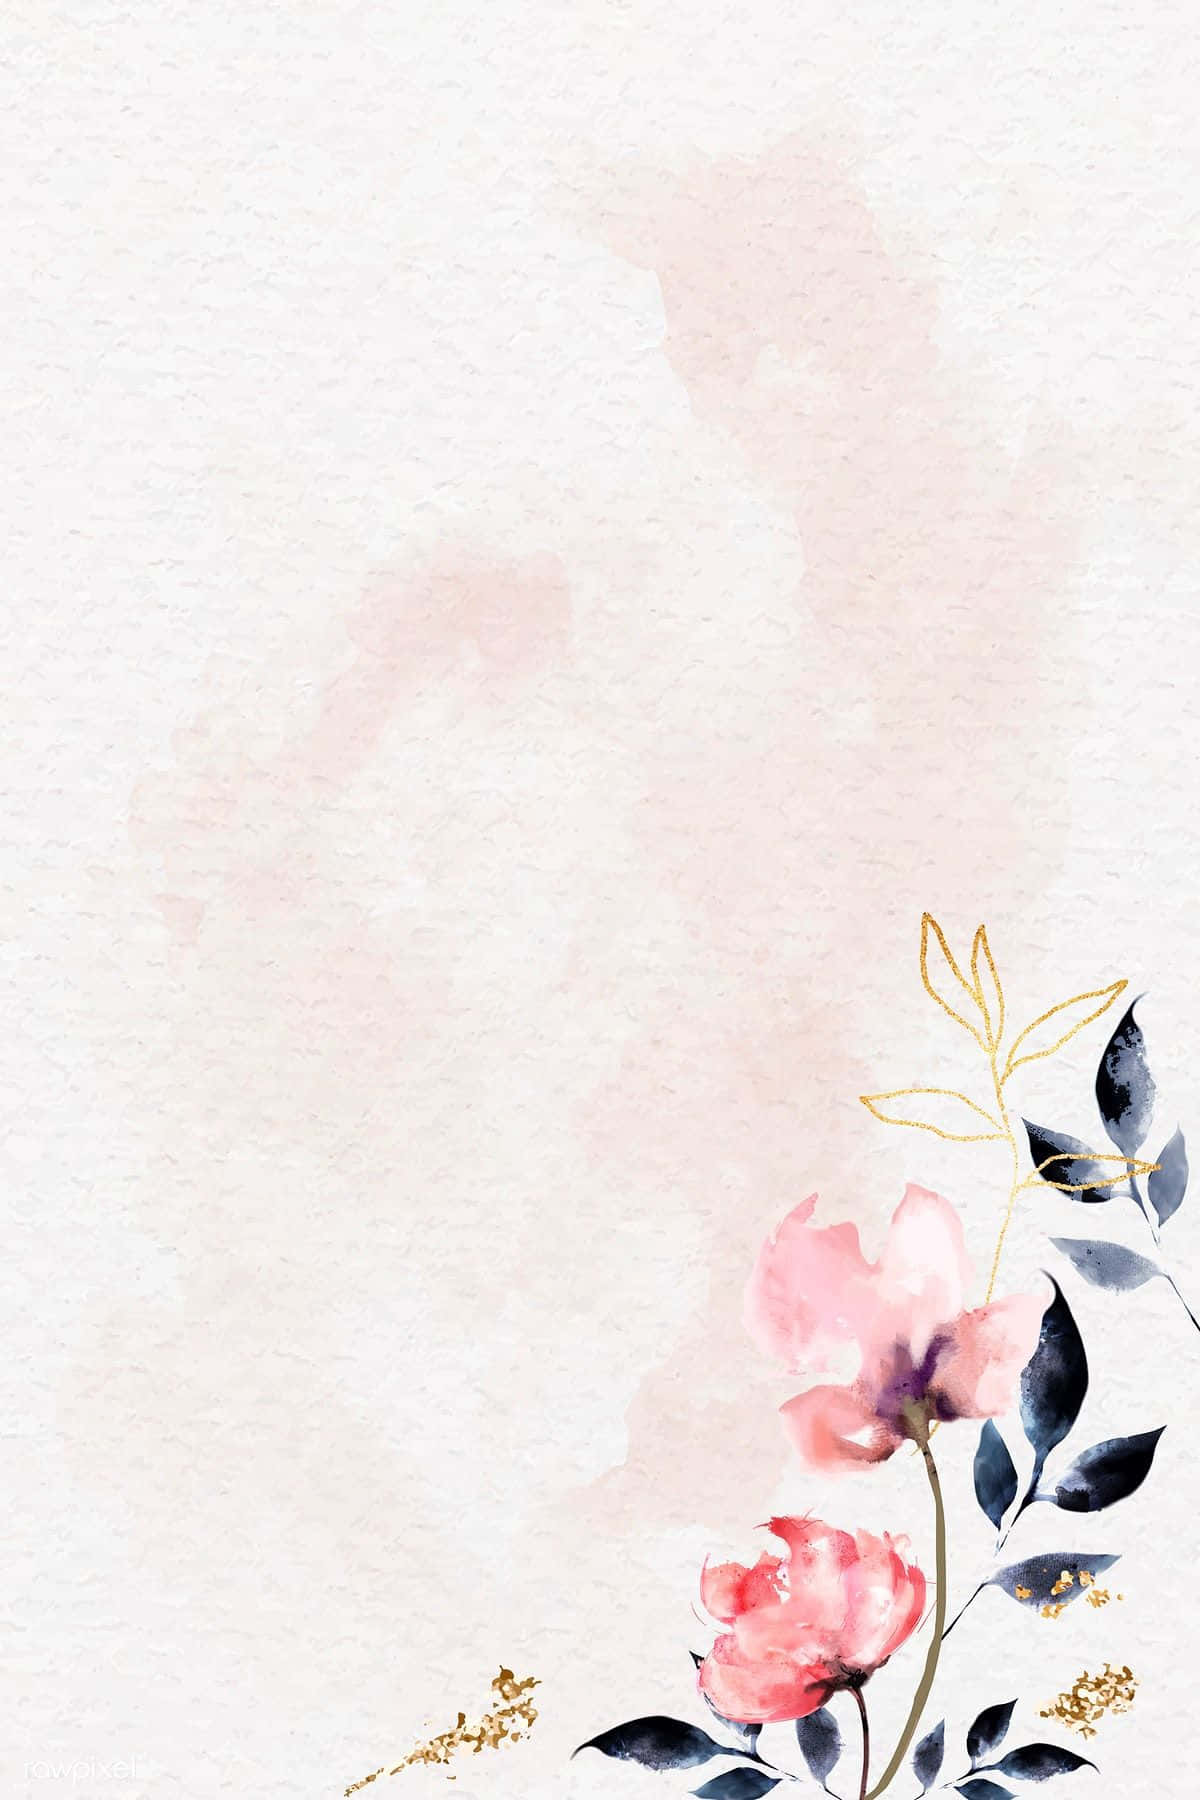 Beautifully crafted watercolor flower background.